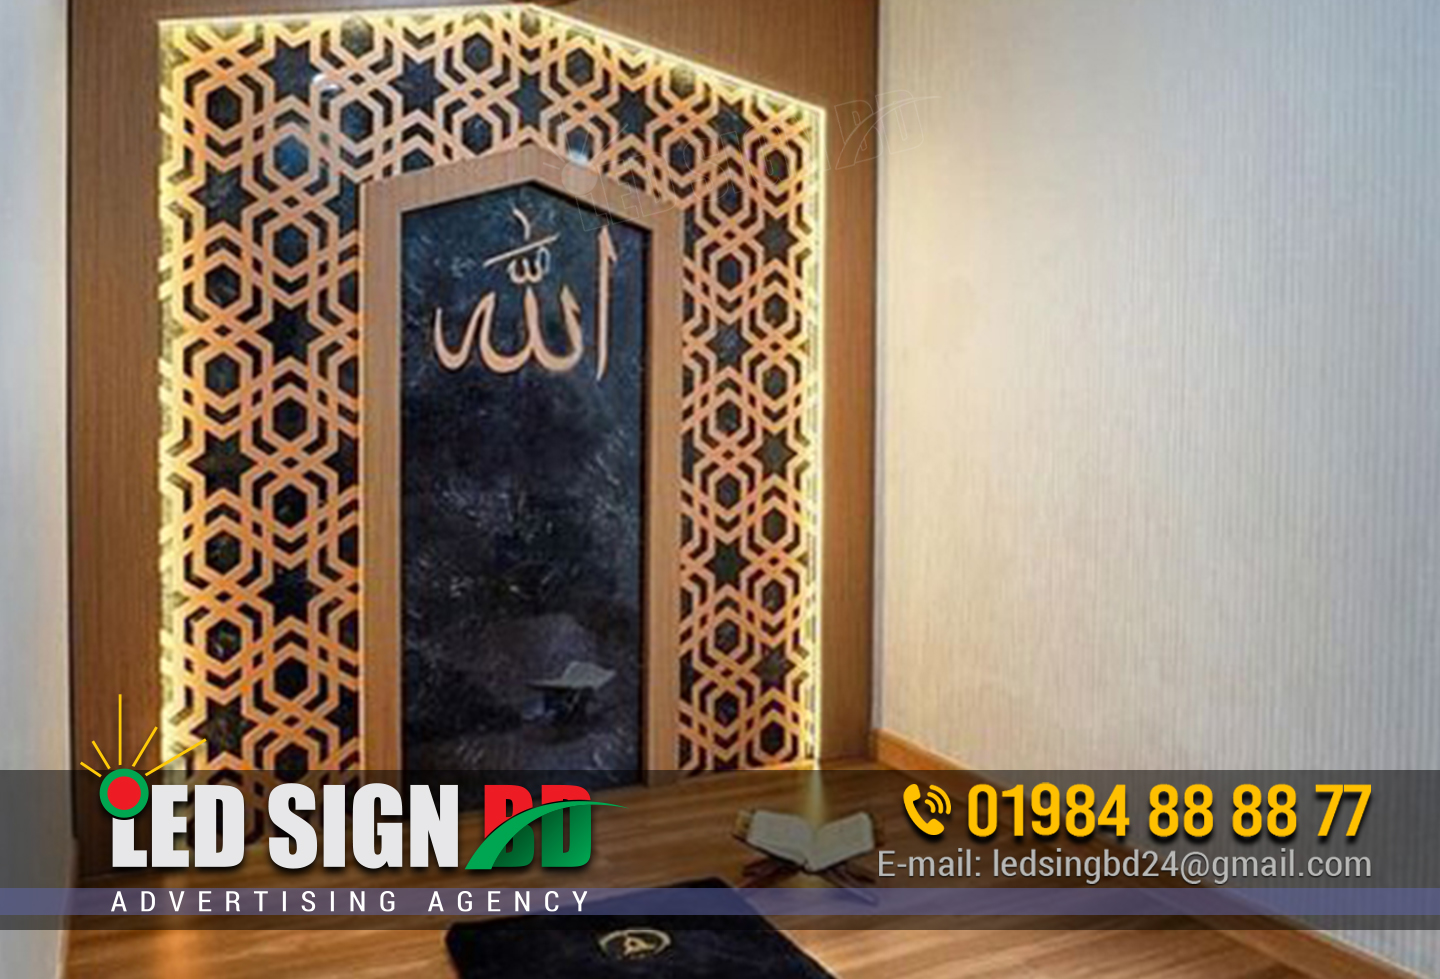 “Led Sign BD Ltd” is the CNC Jali Cutting Design Company in Dhaka Bangladesh. We are working in this sector (CNC Jali Cutting Design) since 2006 inside Dhaka and outside Dhaka. We complete 2500+ CNC Jali Cutting Design Projects last 10 years. For our good service with lifetime support our customer is very happy. We are working with all kind of CNC Jali Cutting Design outside decoration by acrylic letter signage. CNC Jali Cutting Design in Bangladesh. #ramadan #gift #corporate #ramadangift #ramadankareem#Inspiration #hotel, #residential #commercial #design #inspiration #architecture #planning #developers #architects #buildings #property #house #interiorarchitecture #modernarchitecture #newbuilds #buildingdesign #interiordesigners #architecture #architects #designers #linkedin #business #interiordesign #interior #designer #architect #architecturaldesign #cncjalicuttingbangladesh #fiberLaser #lasercutting #lasercut #metallasercutting #MetalPartition #metalfabrication #windowgrill #belconygrill #metalcutting #mosquedesign ##cncwoodworking #lasercutting #fiberlaser #metalcutting #metalfabrication #metalgate #metalrailing #metalwindows #laserwoodcutting #interiordecor #interiordesign #exteriordesign #mosquedoor #mosquedesign CNC jali cutting, wall panel, designed wood door, are the most essential elements in the field of modern architecture, interior and exterior design. At present most of these are executed by the CNC machine. The journey of the “led sign bd ltd” started on 1st January 2006. We are one of the top CNC designs provider in Bangladesh. We are skilled in the field of CNC jali cutting, 2D and 3D panel, designed wood door and all kind of interior design. Kathuriya cutting and engraving design on wood, MDF board, Plywood board, veneer board, particle board, laminate board, acrylic board, PVC board, ACP board, solid wood, composite panel. We are much expertise in the field of customized design. Please share your requirement’s image or imagination with us. Our design team will fulfill your requirement ASAP. Metal cutting on 2mm and 3mm MS and SS metal plain sheet.